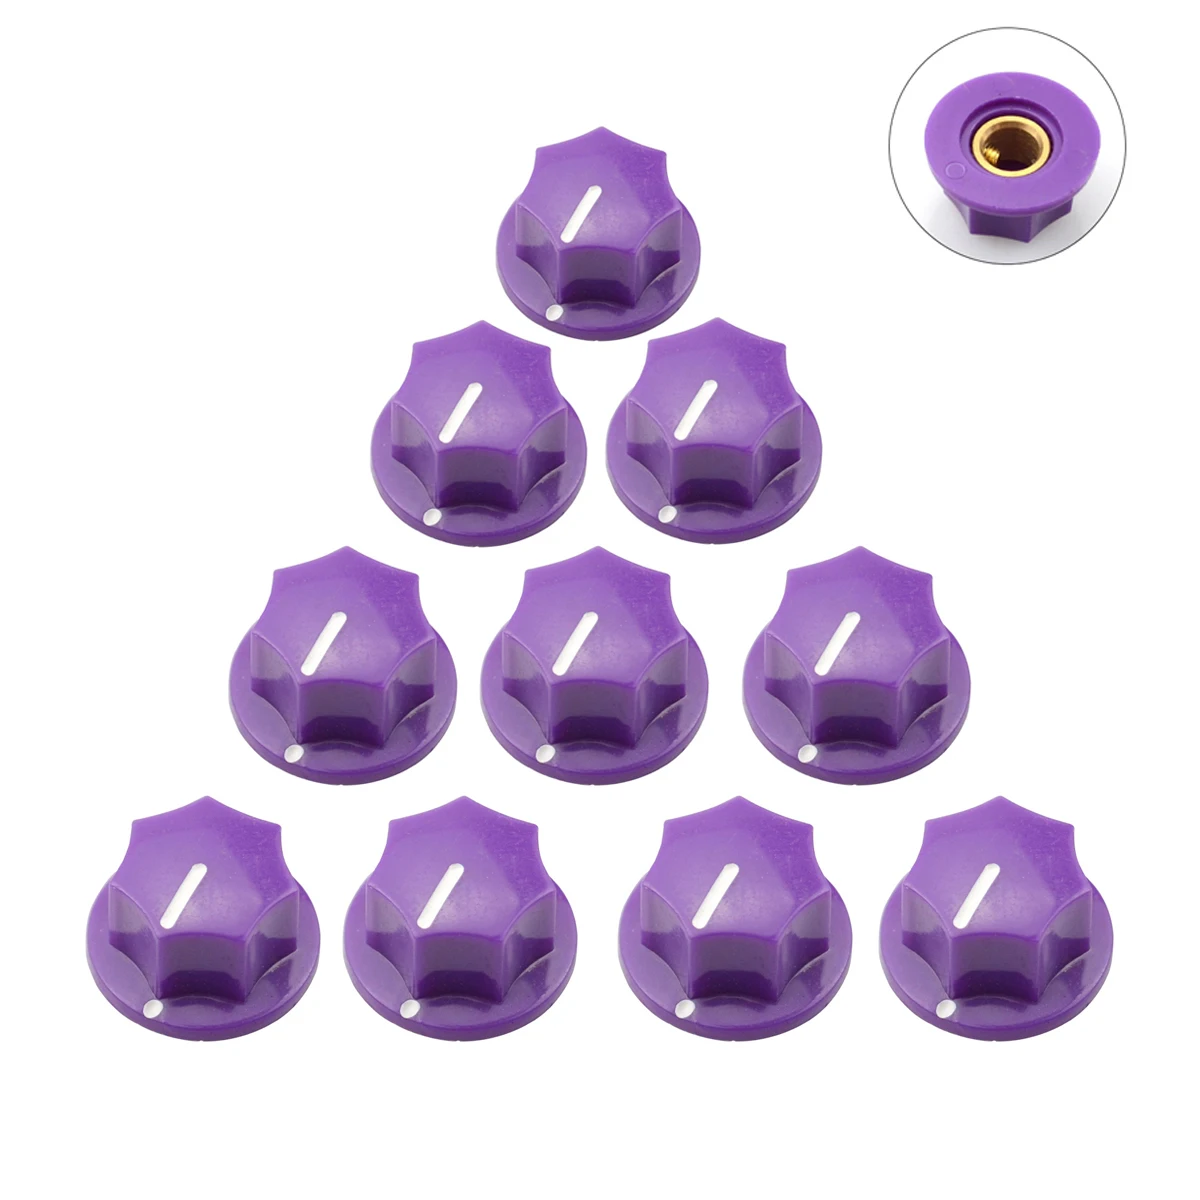 Enlarge 10 pcs x Purple Small Size Guitar Knob MXR Style Skirted AMP Knob Effects Pedal Knobs Brass Insert Guitar Accessories